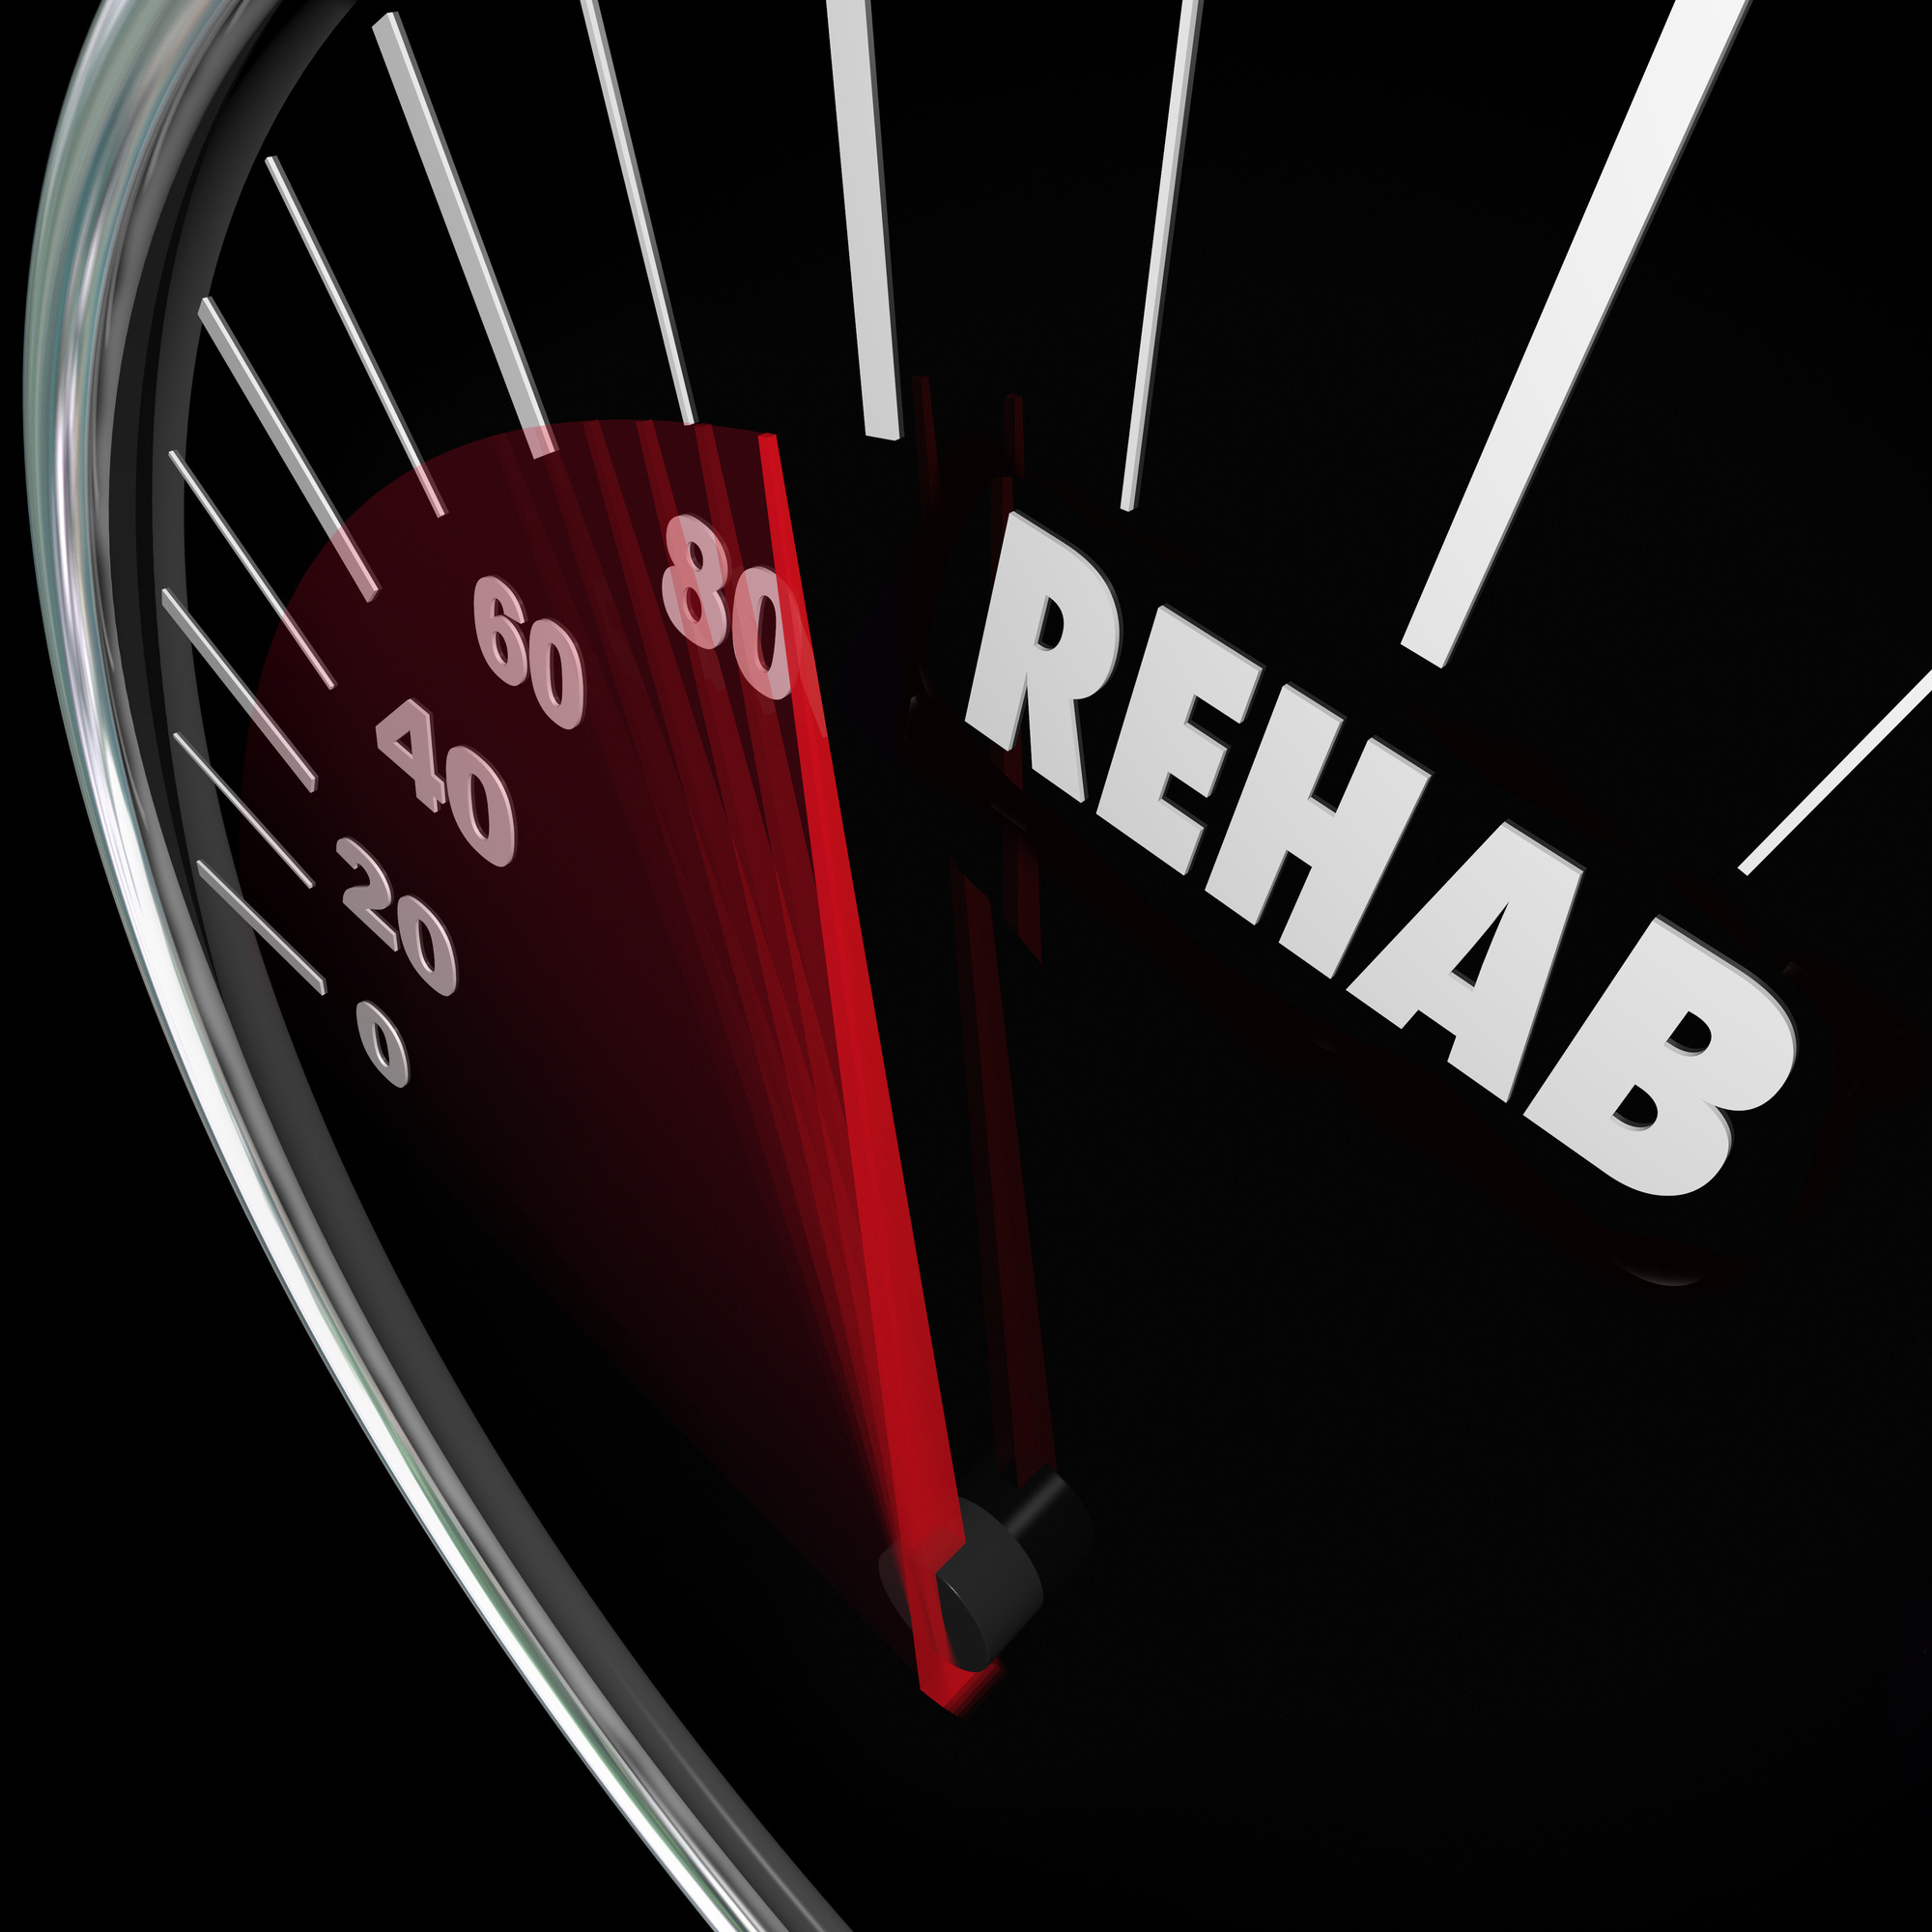 Choosing the Best Rehab for Your Native American Loved One